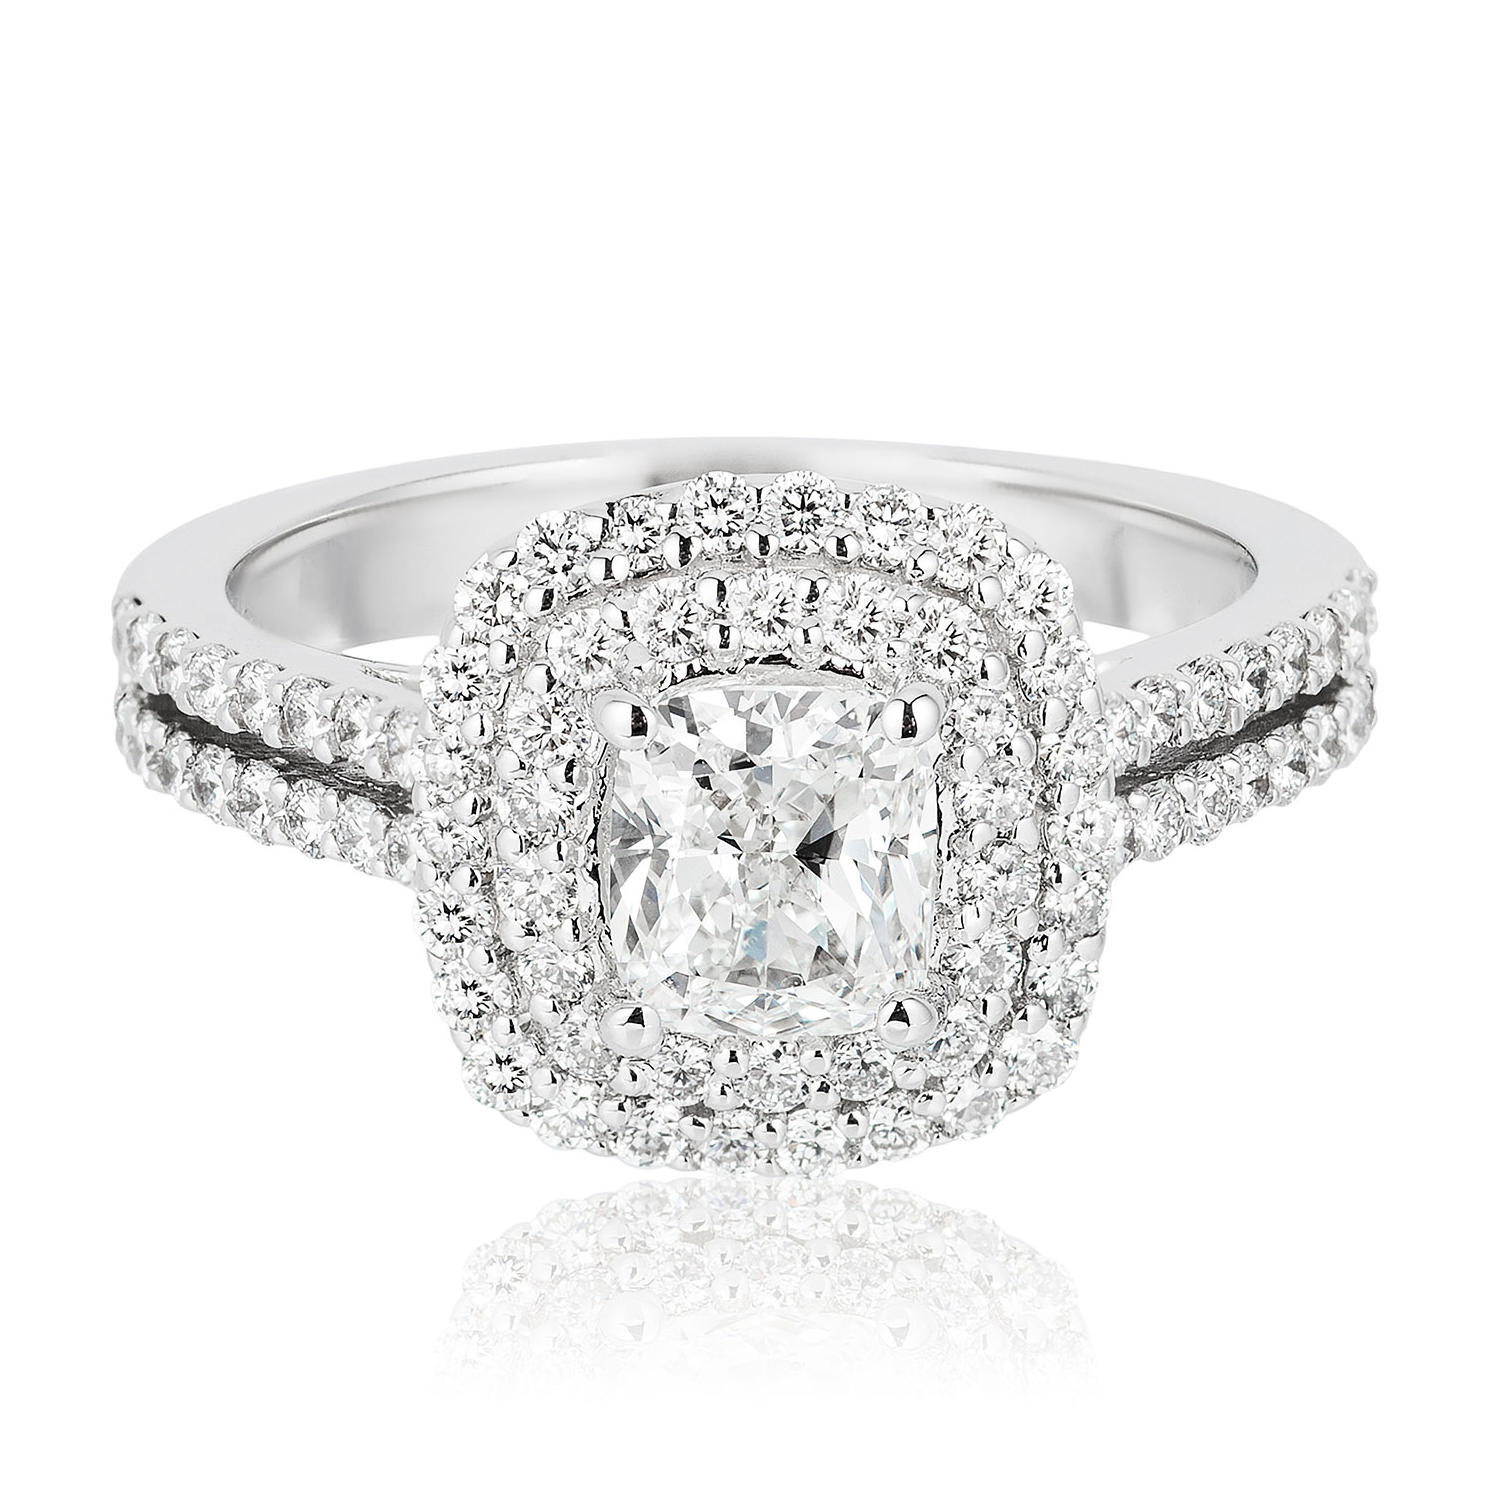 Superior Quality Collection 1.73 CT. T.W. Cushion Shaped Diamond Engagement Ring in 18K White Gold (I, VS2) 9.5